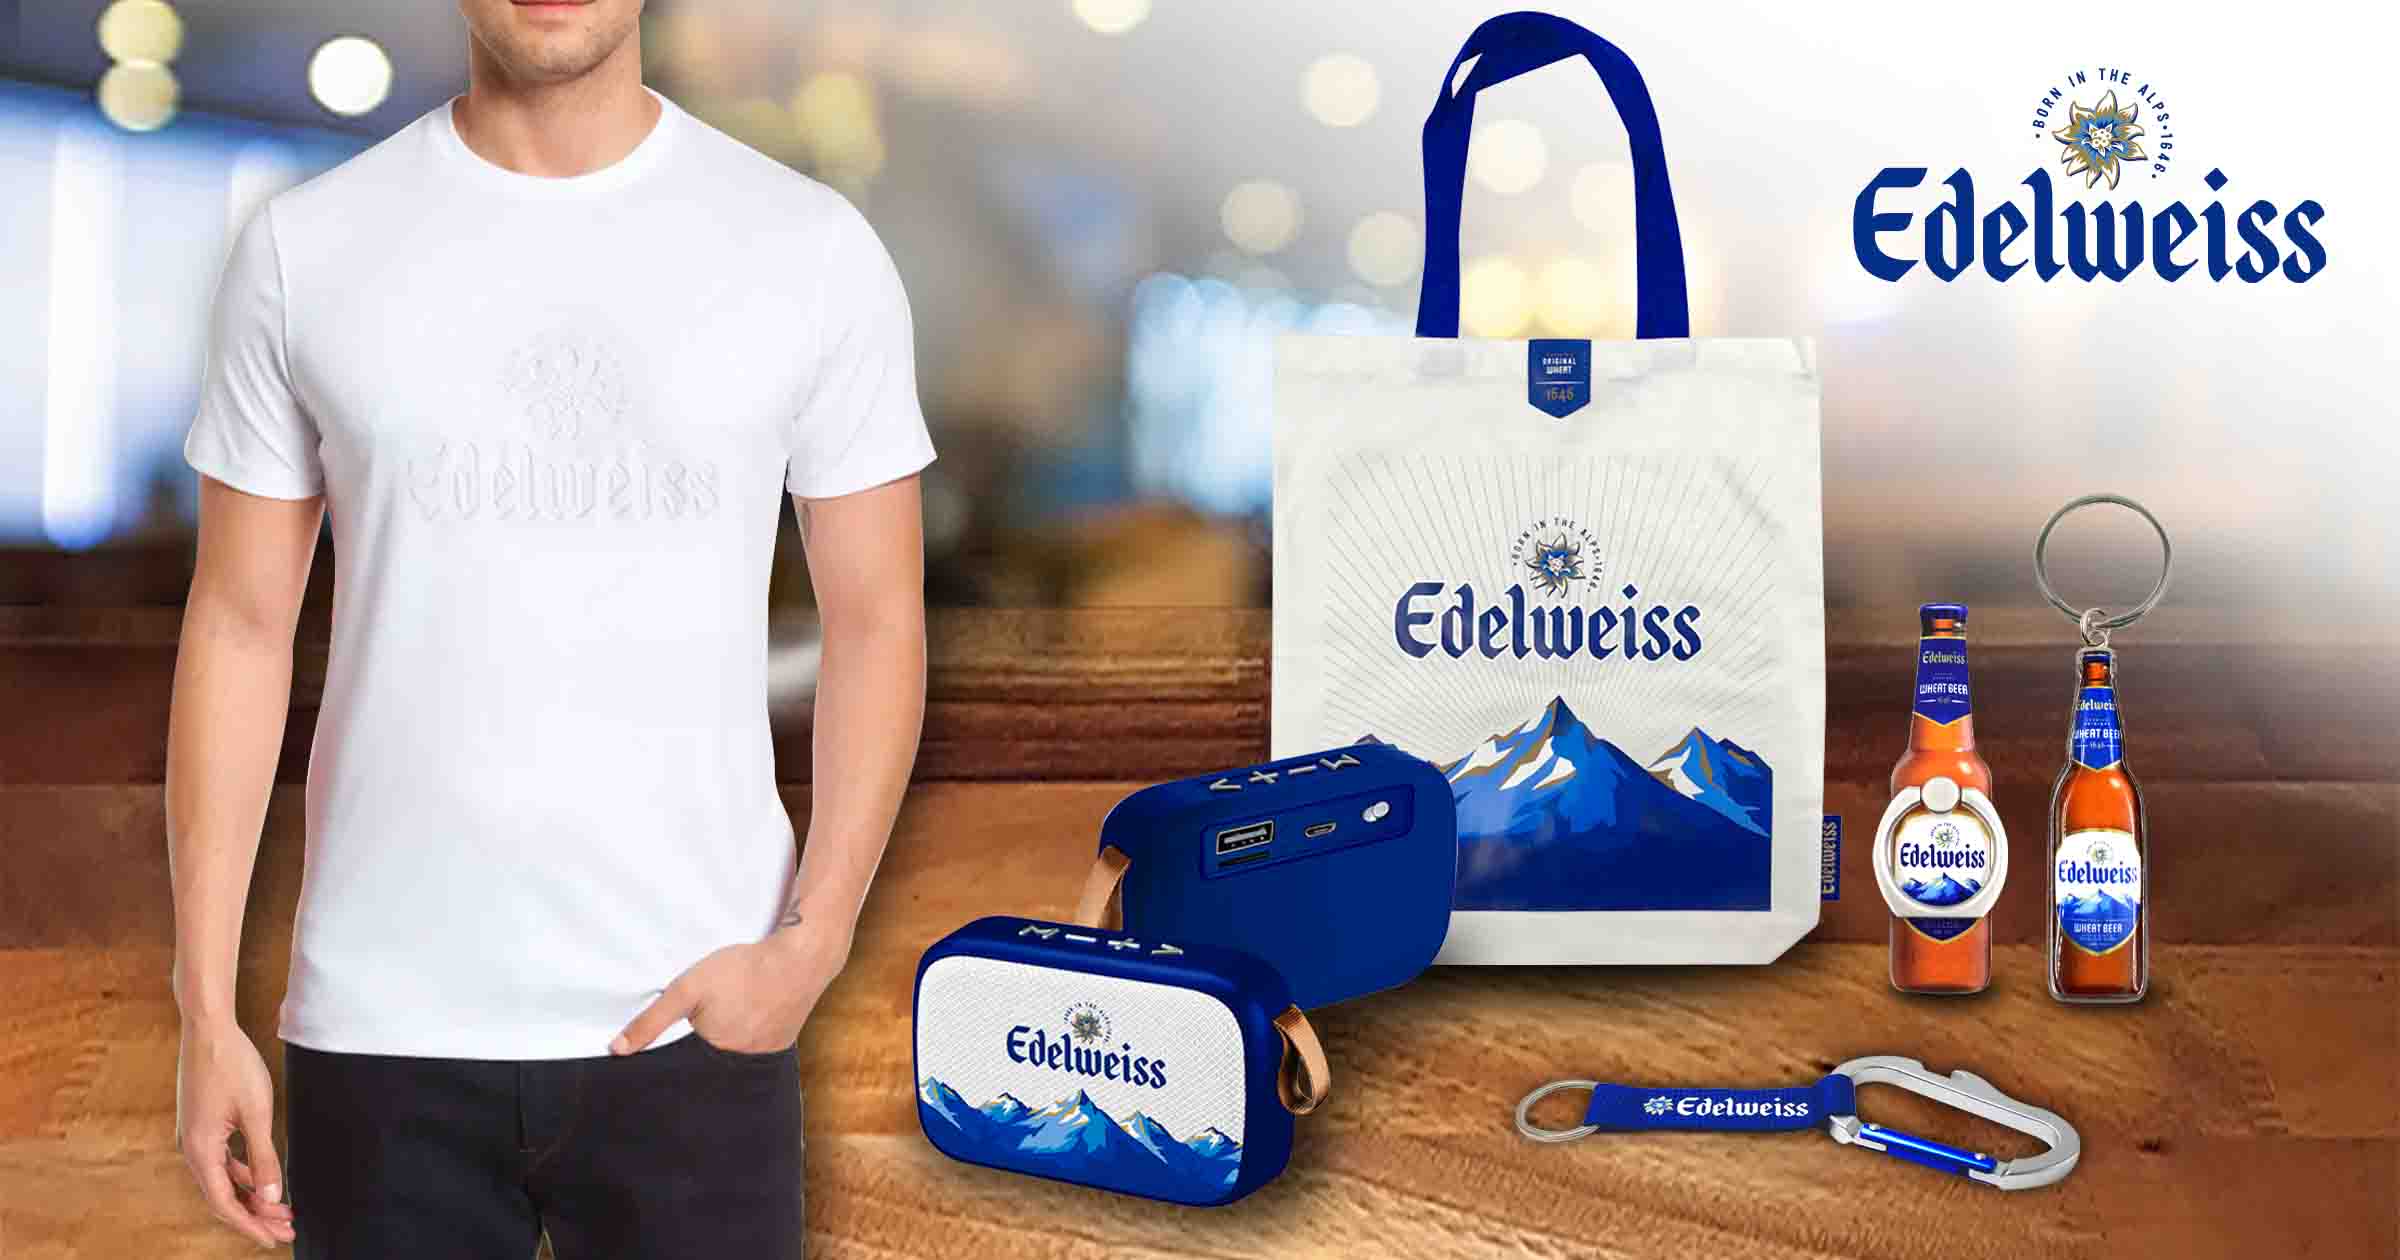 Edelweiss Regional Promotion Gifts